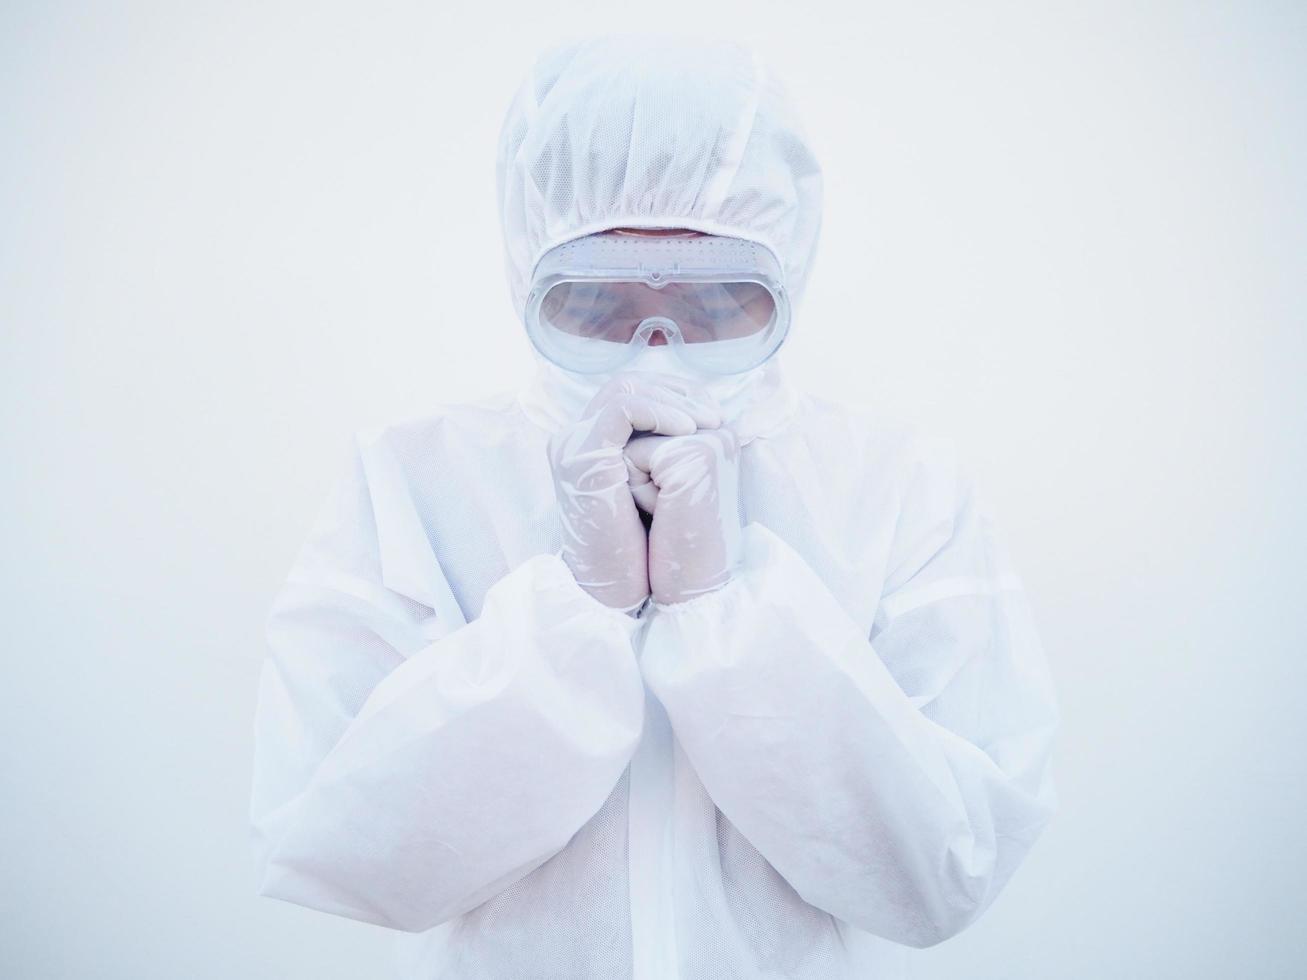 Closeup of asian male doctor or scientist in PPE suite uniform has stress and pray during an outbreak of coronavirus or COVID-19 isolated white background. photo